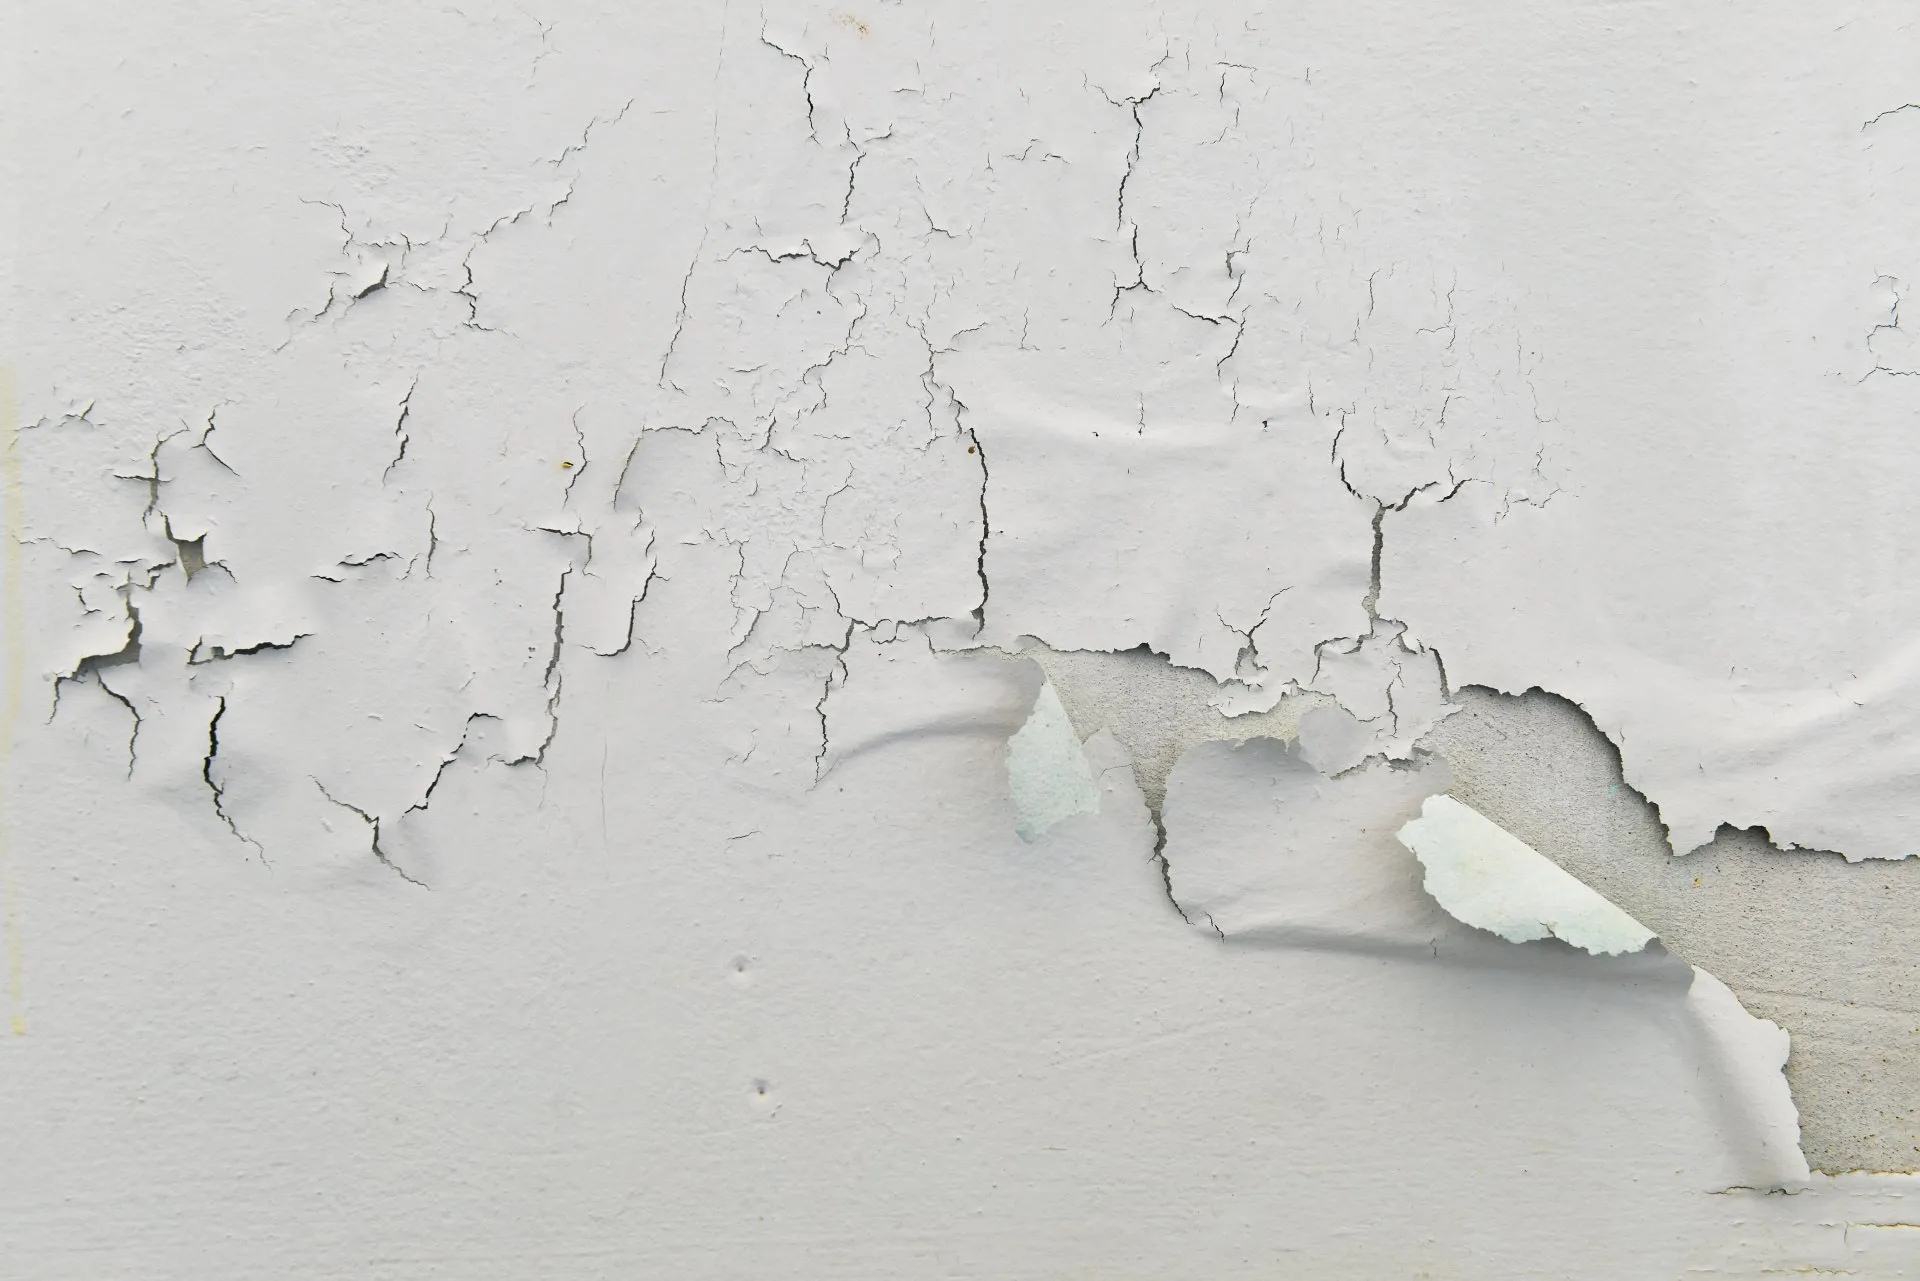 Cracking: This occurs when the paint film becomes brittle and begins to crack, often due to improper surface preparation or using the wrong paint type for the surface.